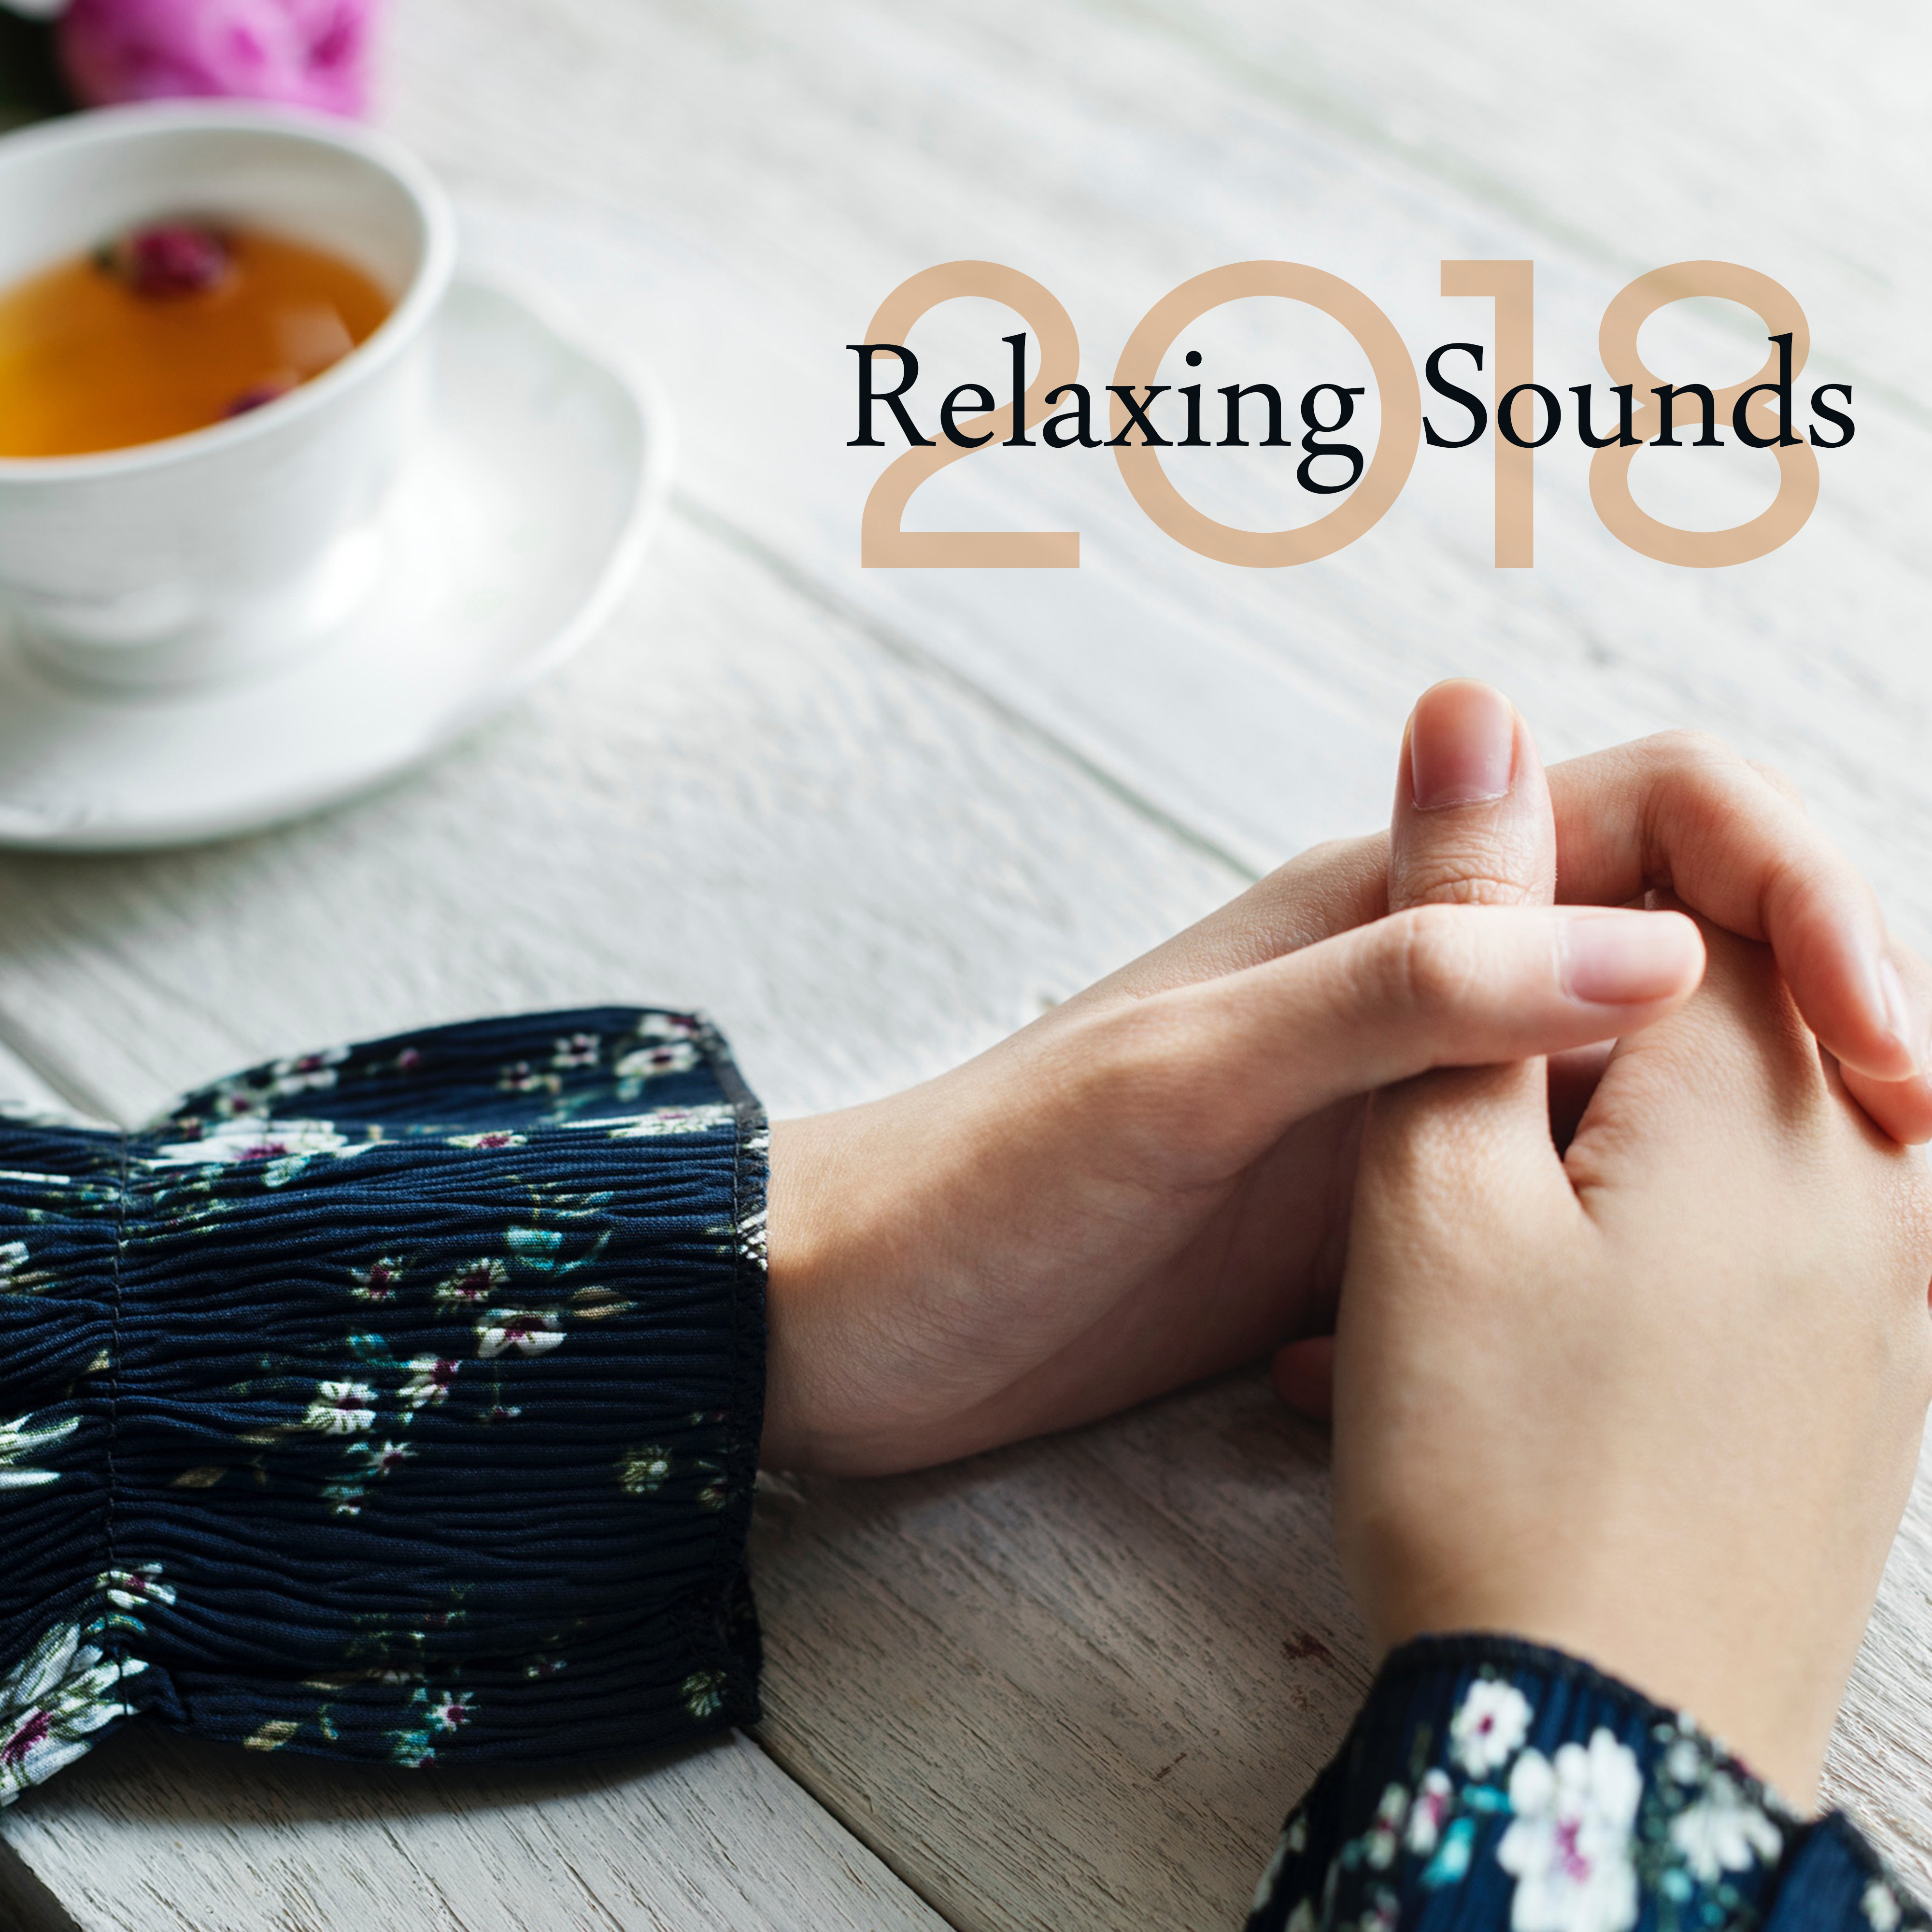 Relaxing Sounds 2018